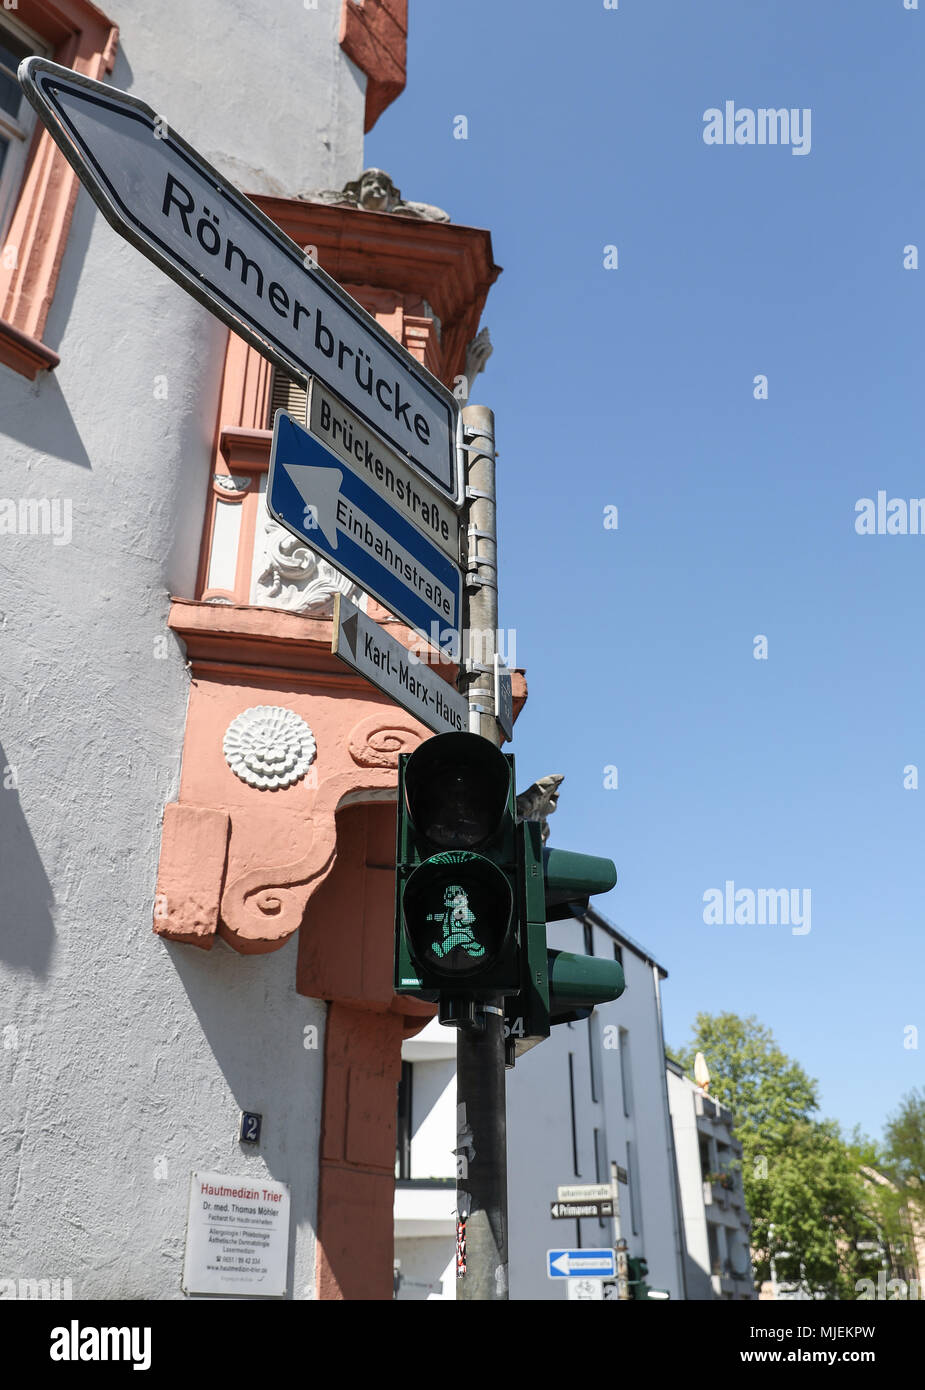 Trier, Karl Marx in Trier. 5th May, 2018. Photo taken on May 4, 2018 show the traffic light with the image of Karl Marx in Trier, Germany. The 200th anniversary of Karl Marx's birth falls on May 5, 2018. Credit: Shan Yuqi/Xinhua/Alamy Live News Stock Photo